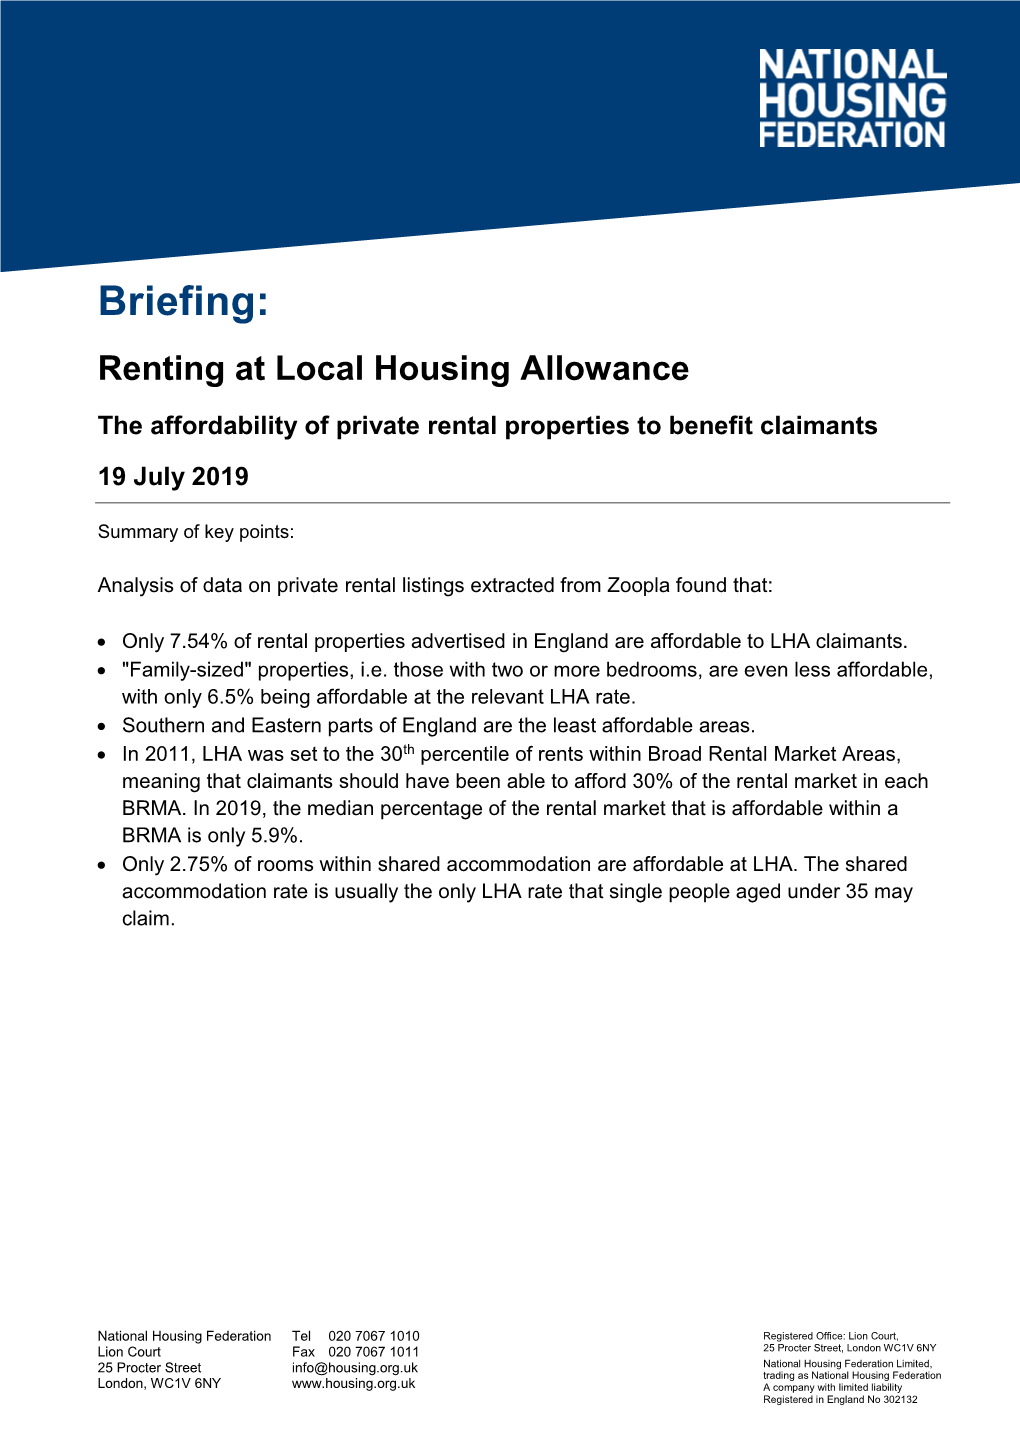 Briefing: Renting at Local Housing Allowance